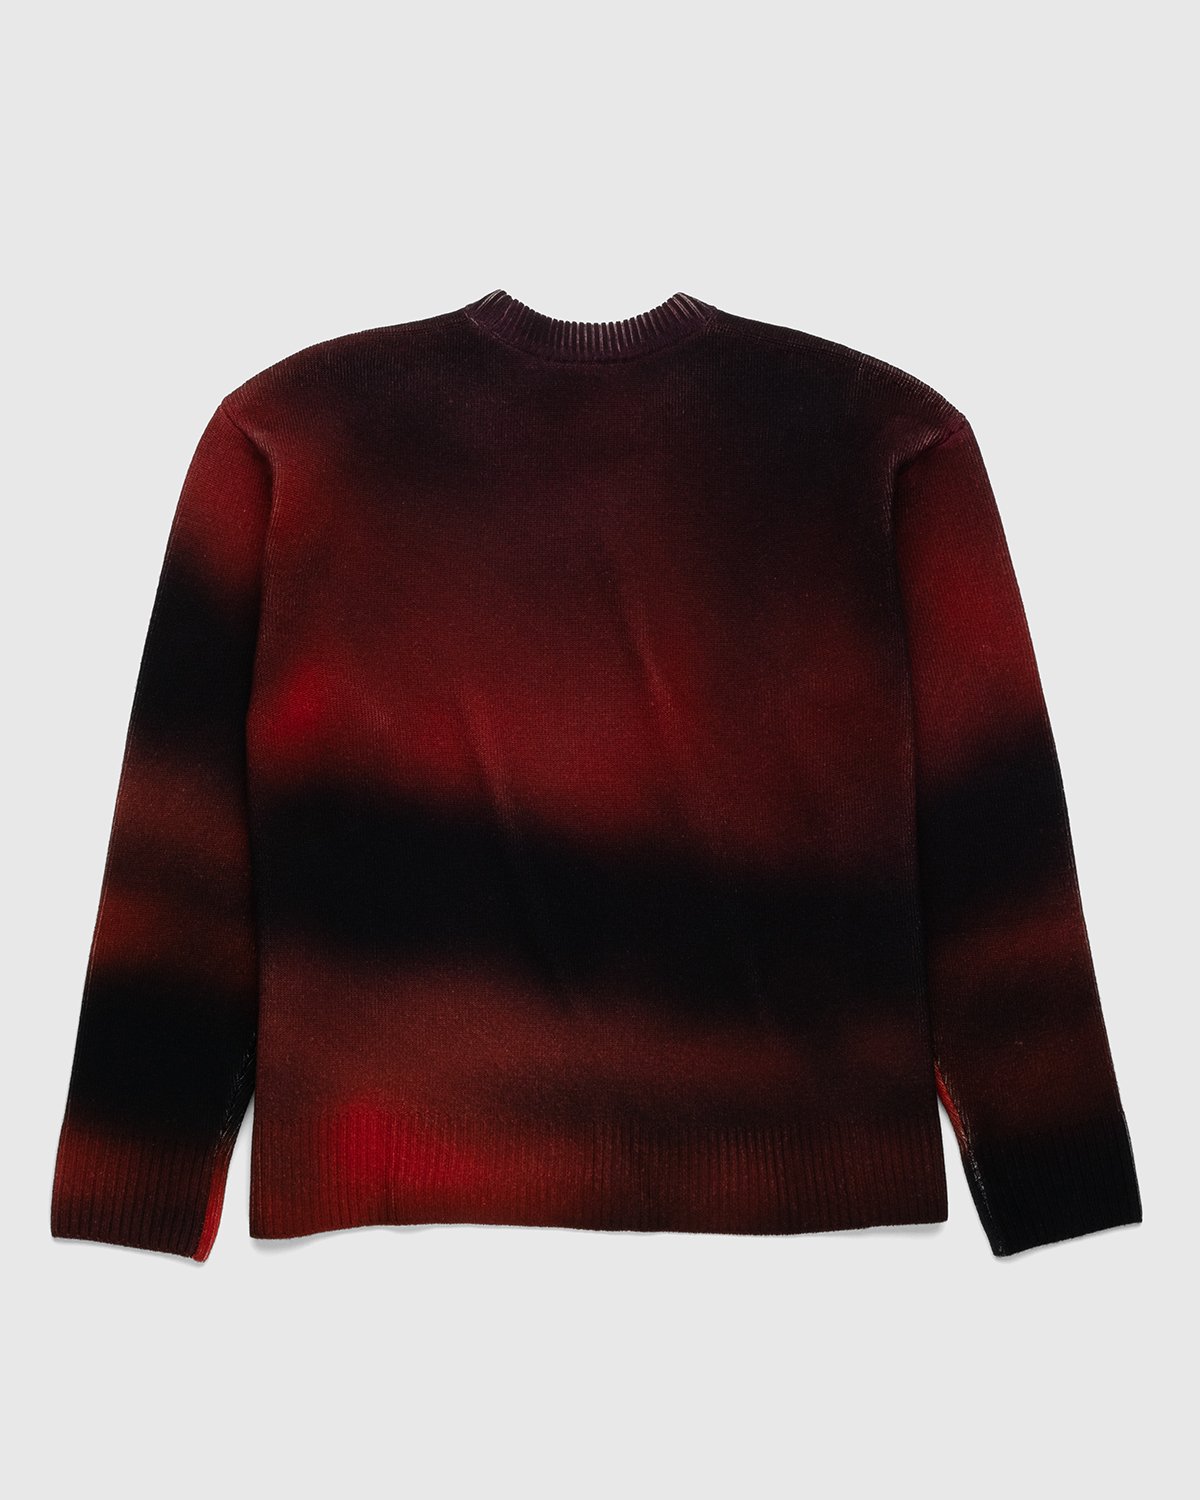 A-Cold-Wall* - Digital Print Knit Red - Clothing - Red - Image 2